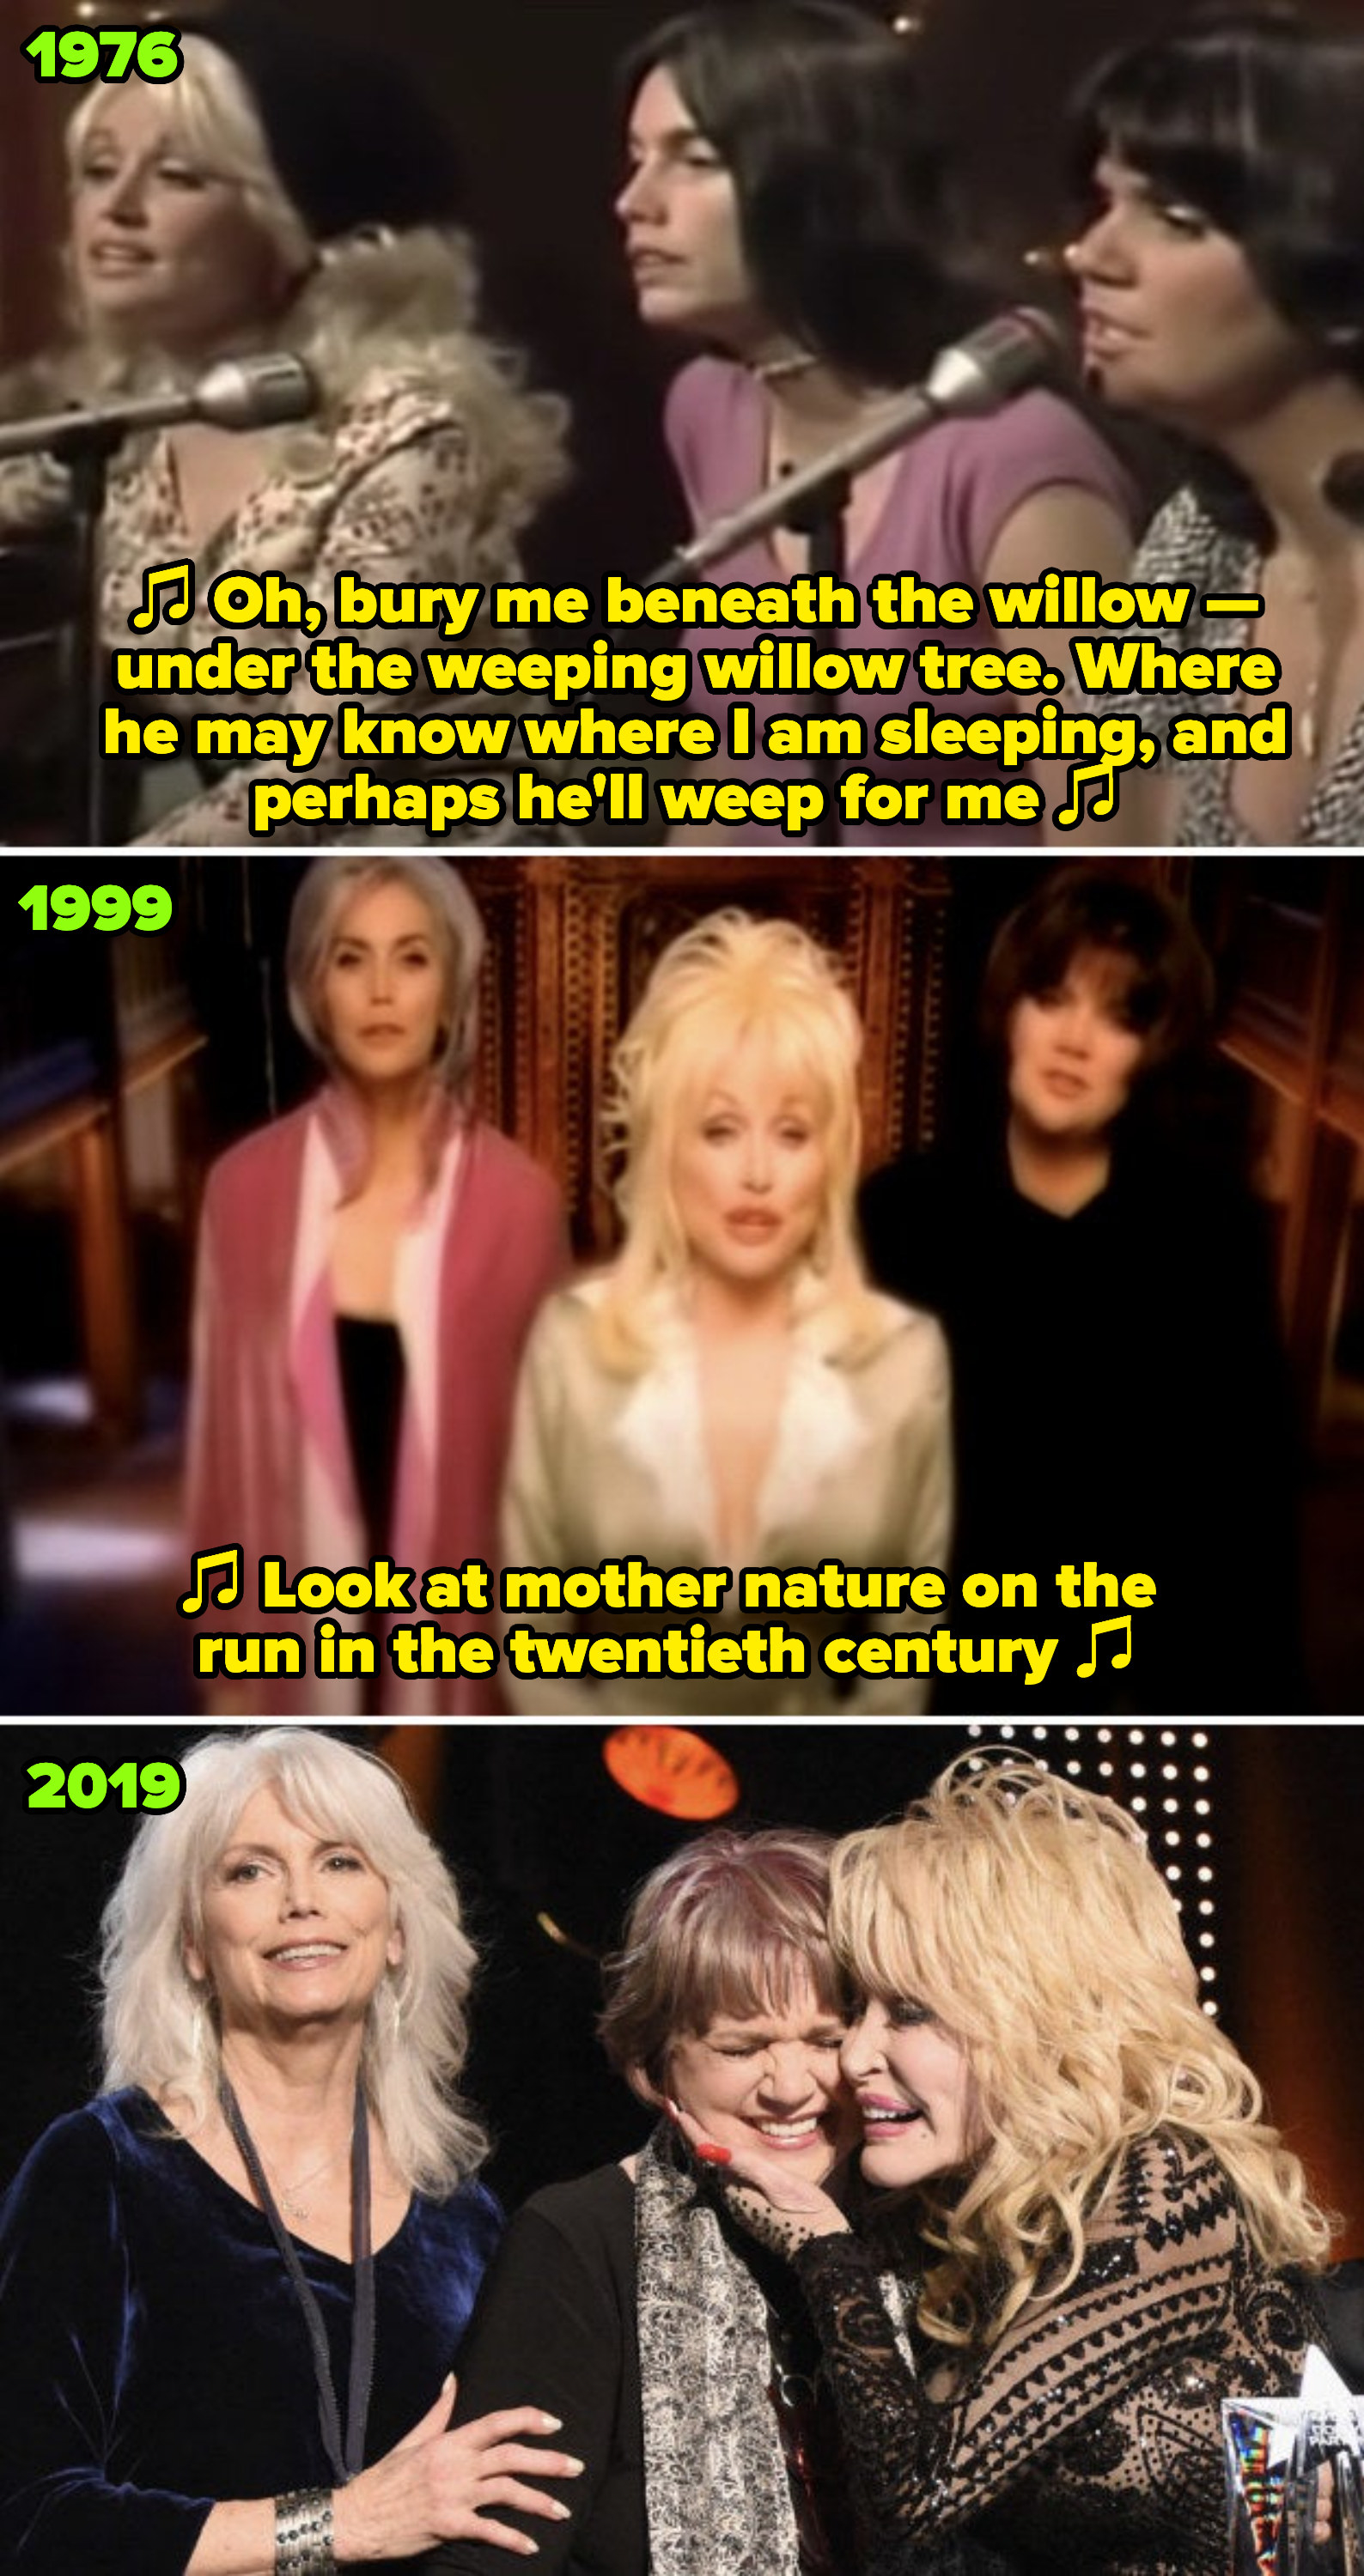 Parton, Harris, and Ronstadt performing on &quot;Dolly,&quot; singing: &quot;Bury me beneath the willow, beneath the weeping willow tree;&quot; the trio in their &quot;After the Gold Rush&quot; music video; the trio at Parton&#x27;s MusiCares Person Of The Year ceremony in 2019